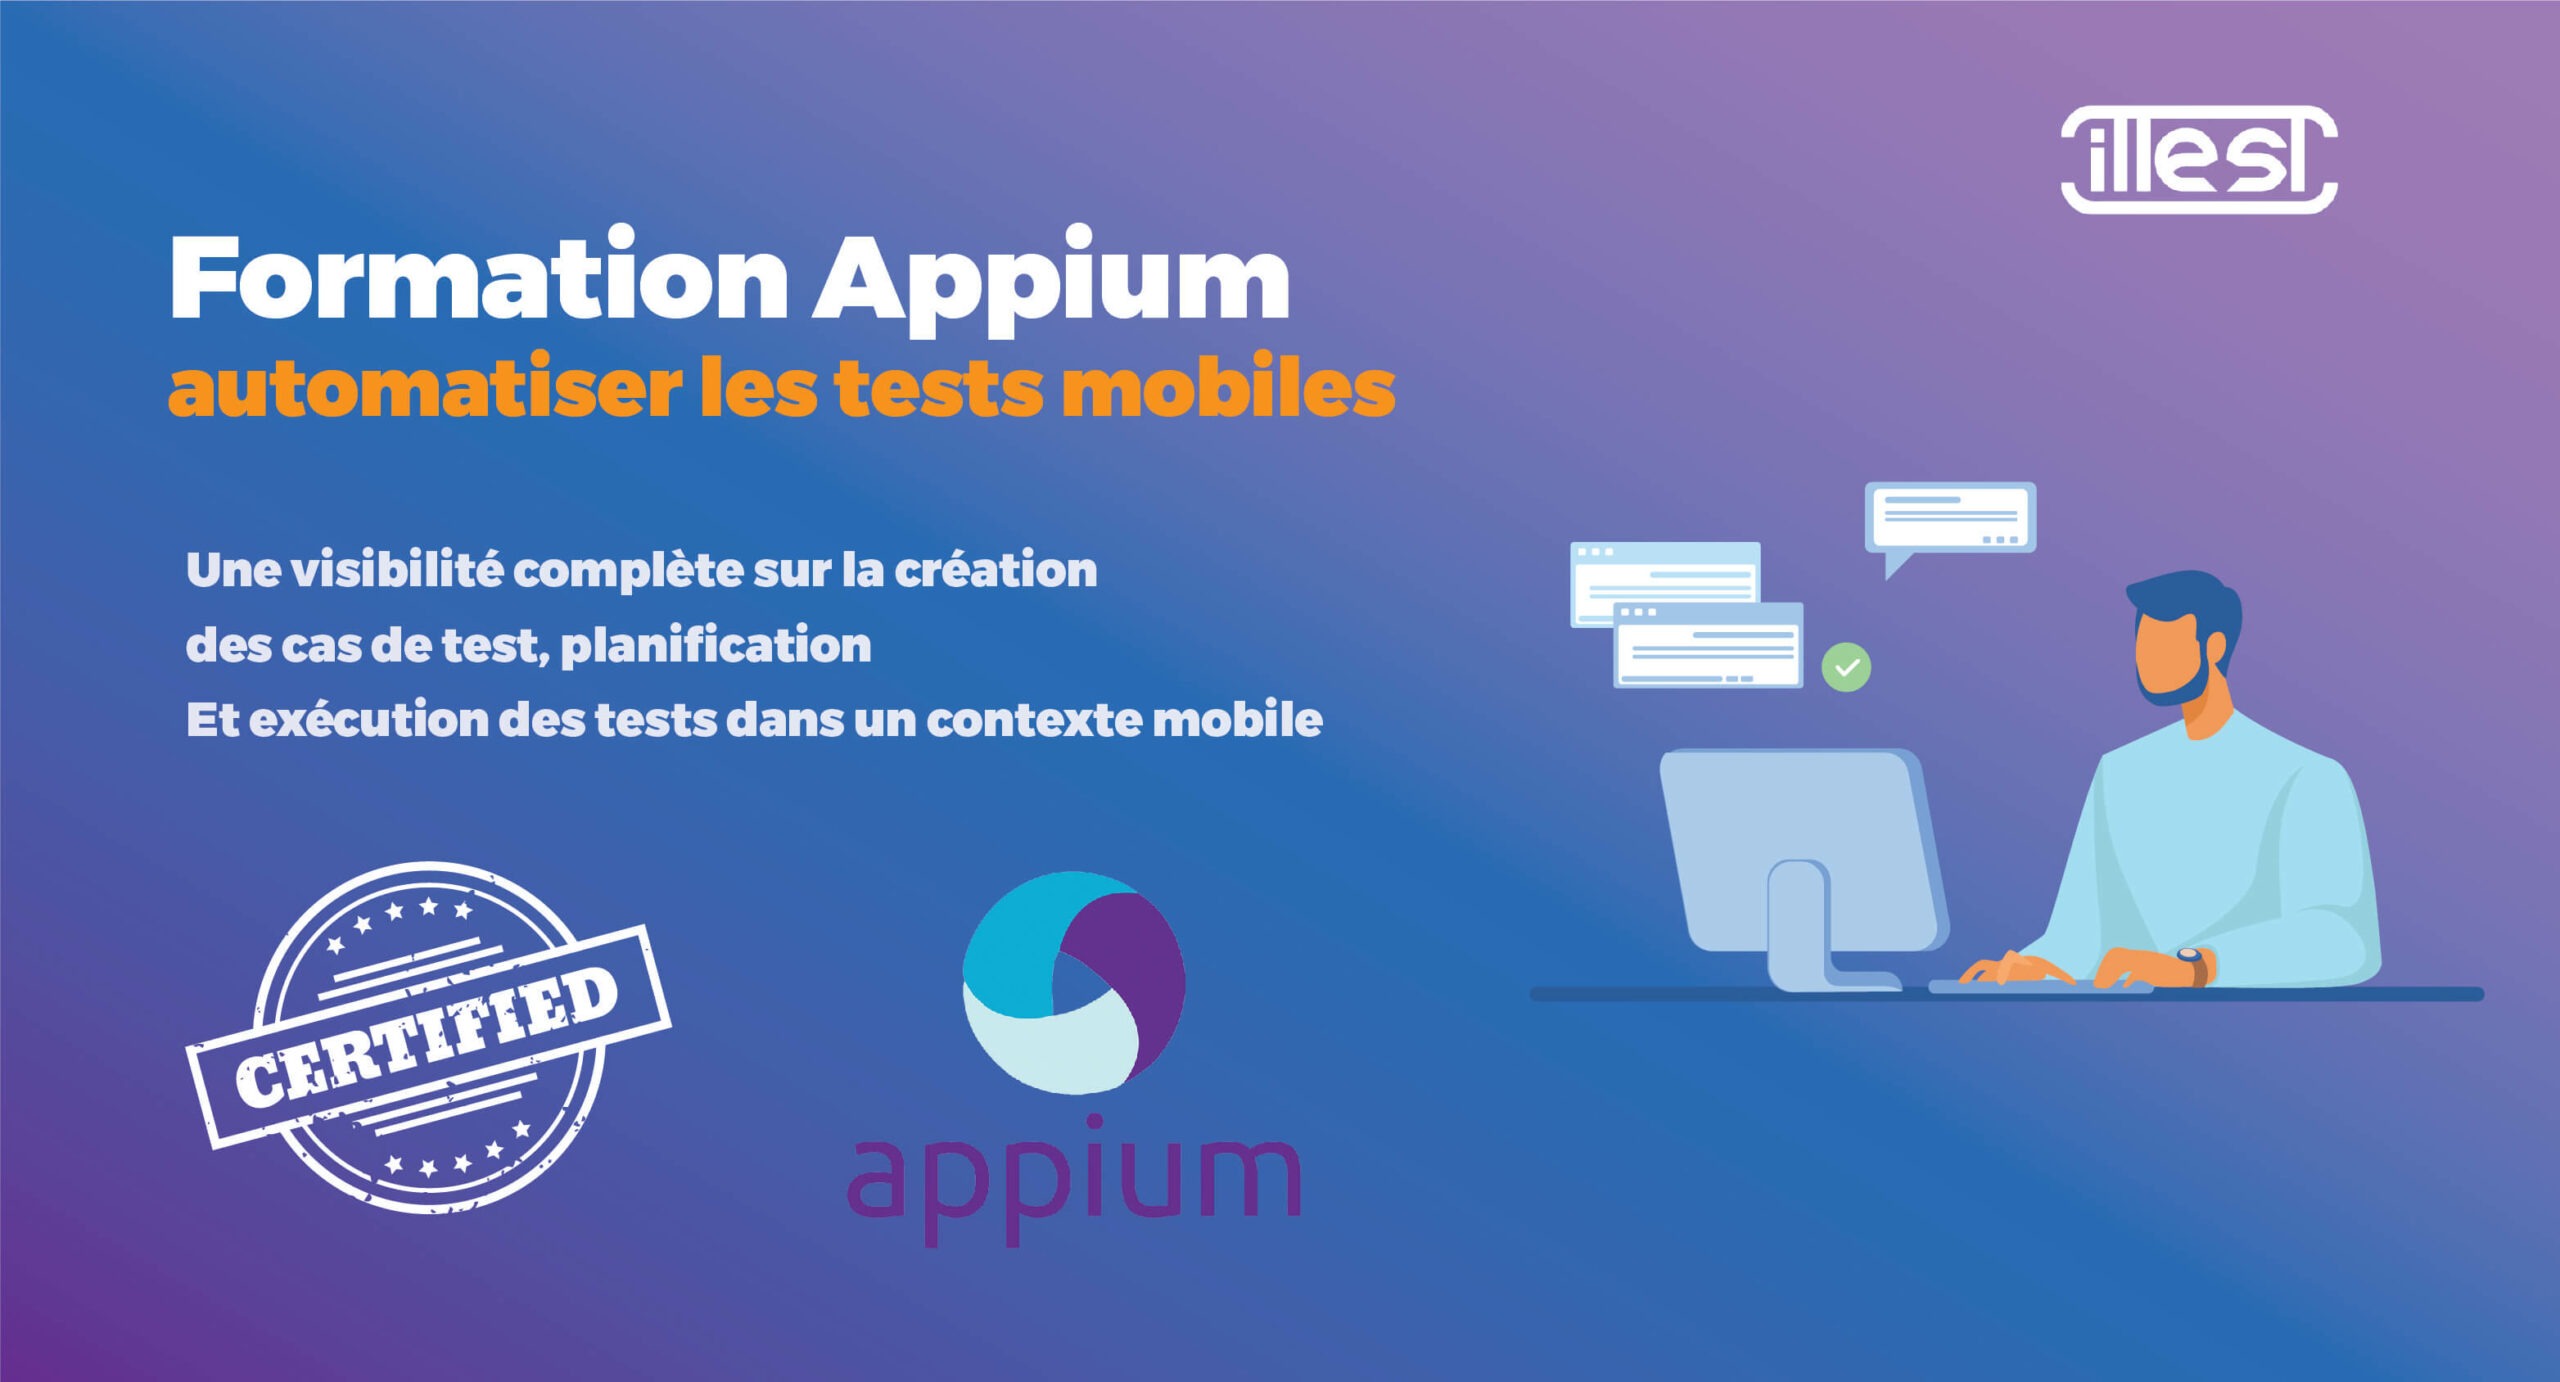 Formation Appium, automatiser les tests mobiles